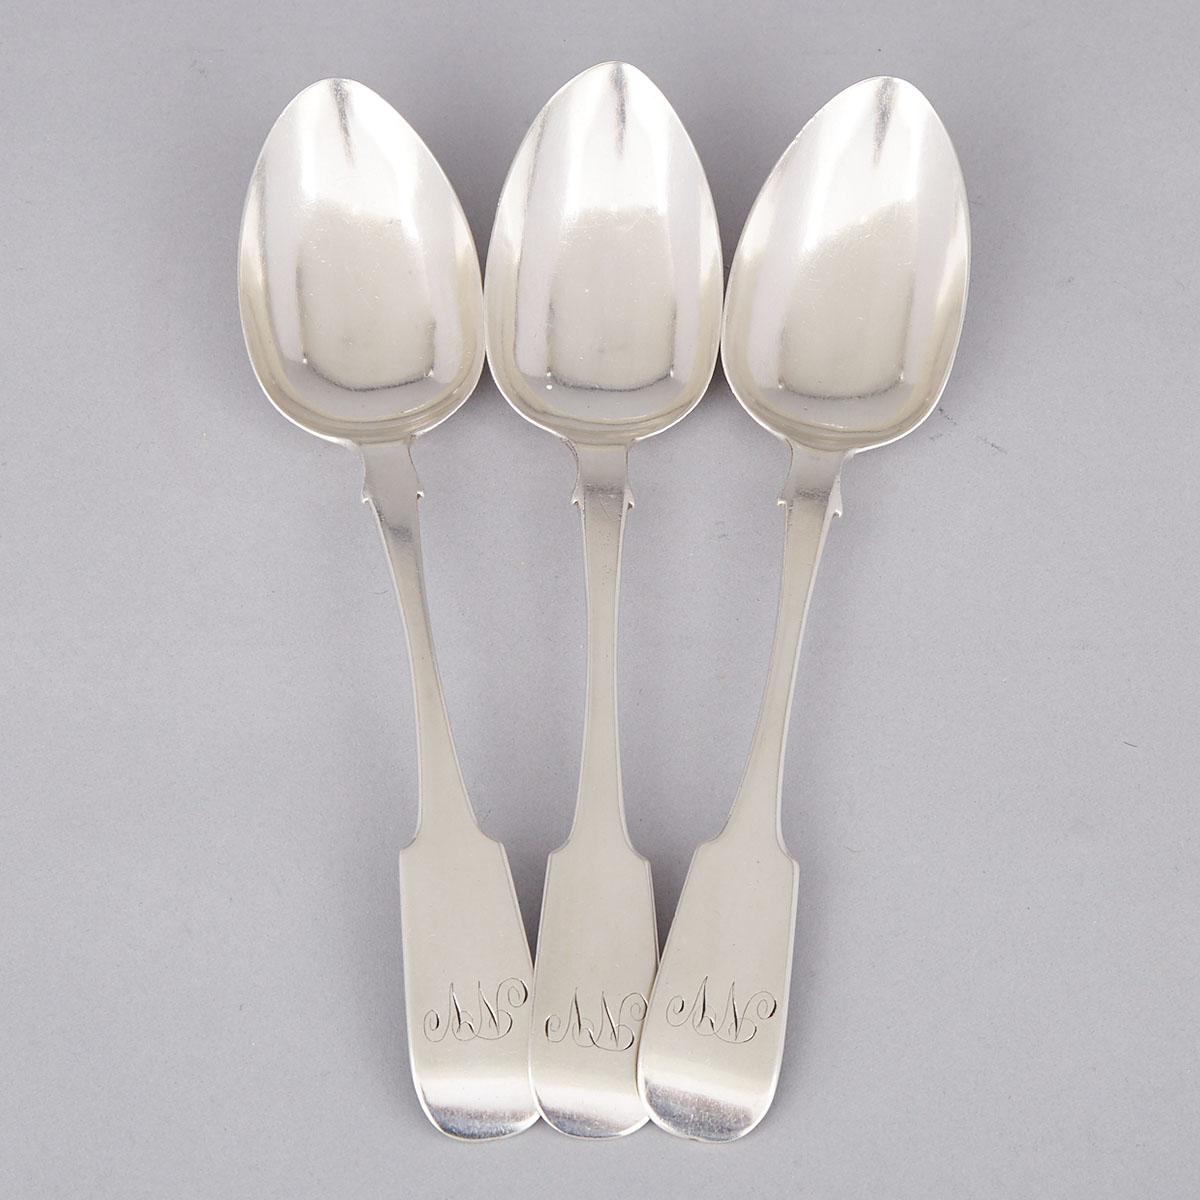 Three Canadian Silver Fiddle Pattern Table Spoons, Louis Phillipe Boivin, Montreal, c.1850